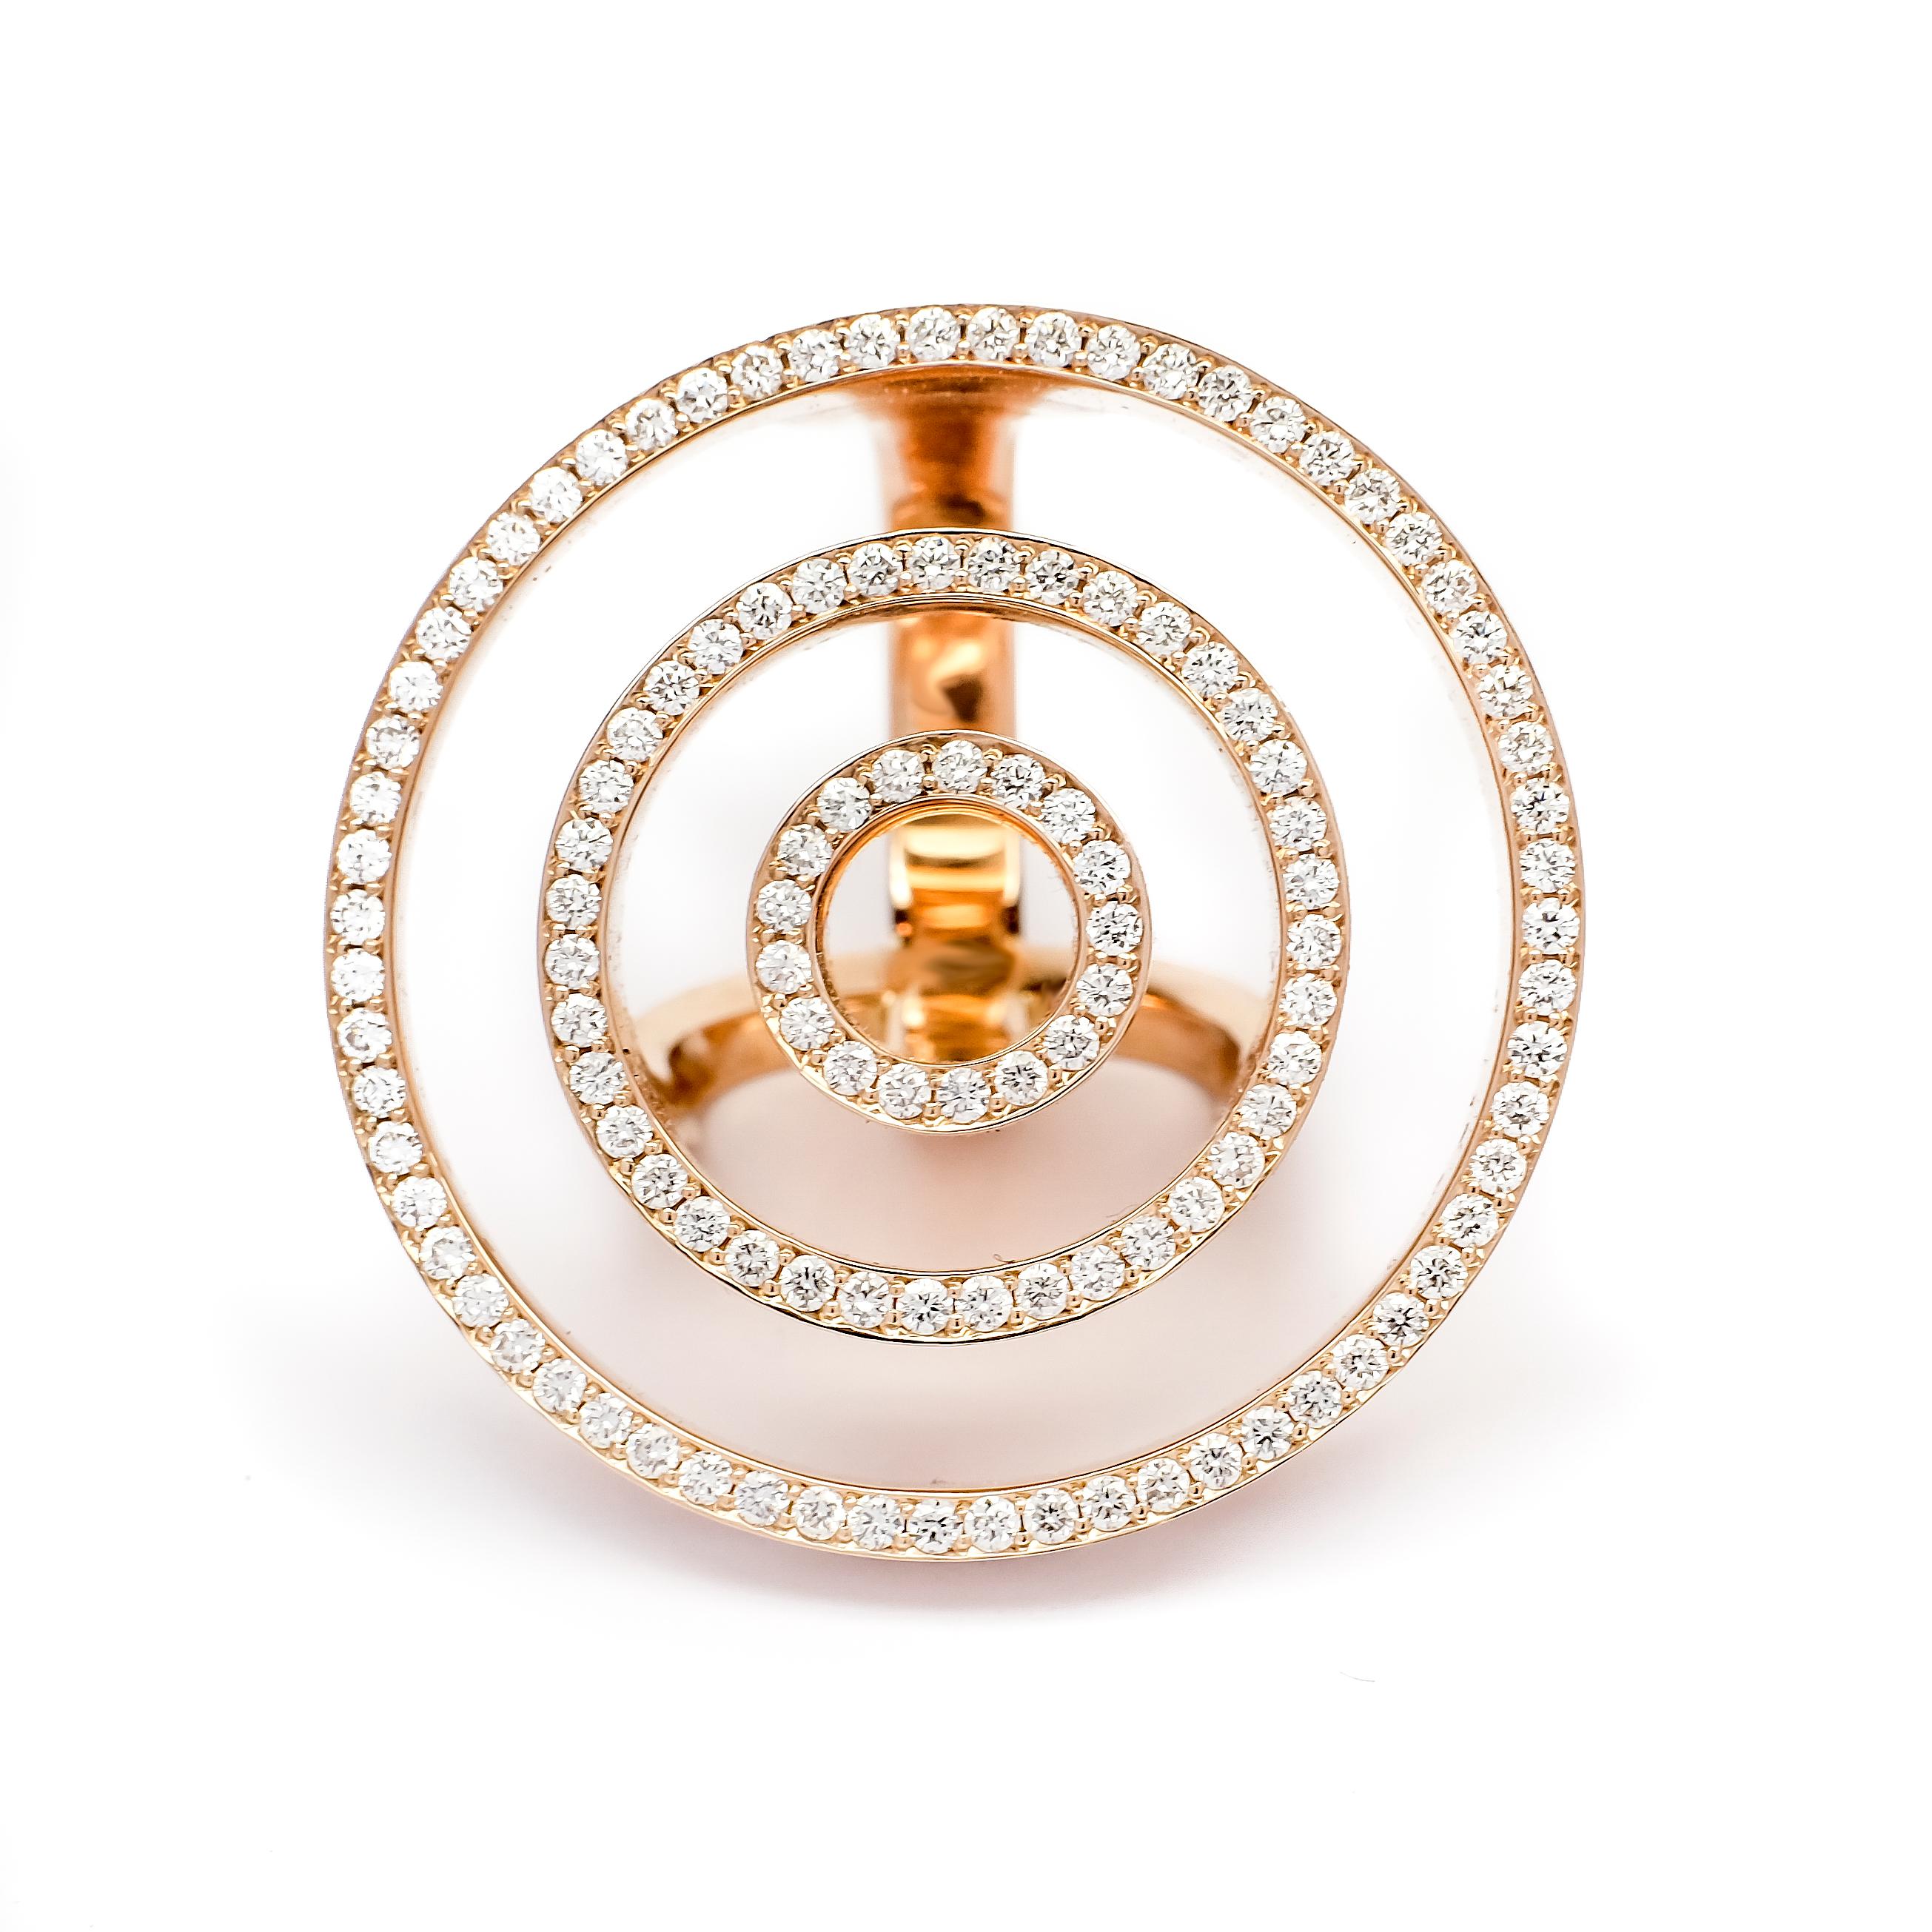 Crafted out of 14 karat rose gold this ring has a total of 1.30ct of top white vvs diamonds.
With this contemporary design Frohmann seeks to bring out the magic of jewelry by giving the illusion that the 3 circles are floating over the finger with